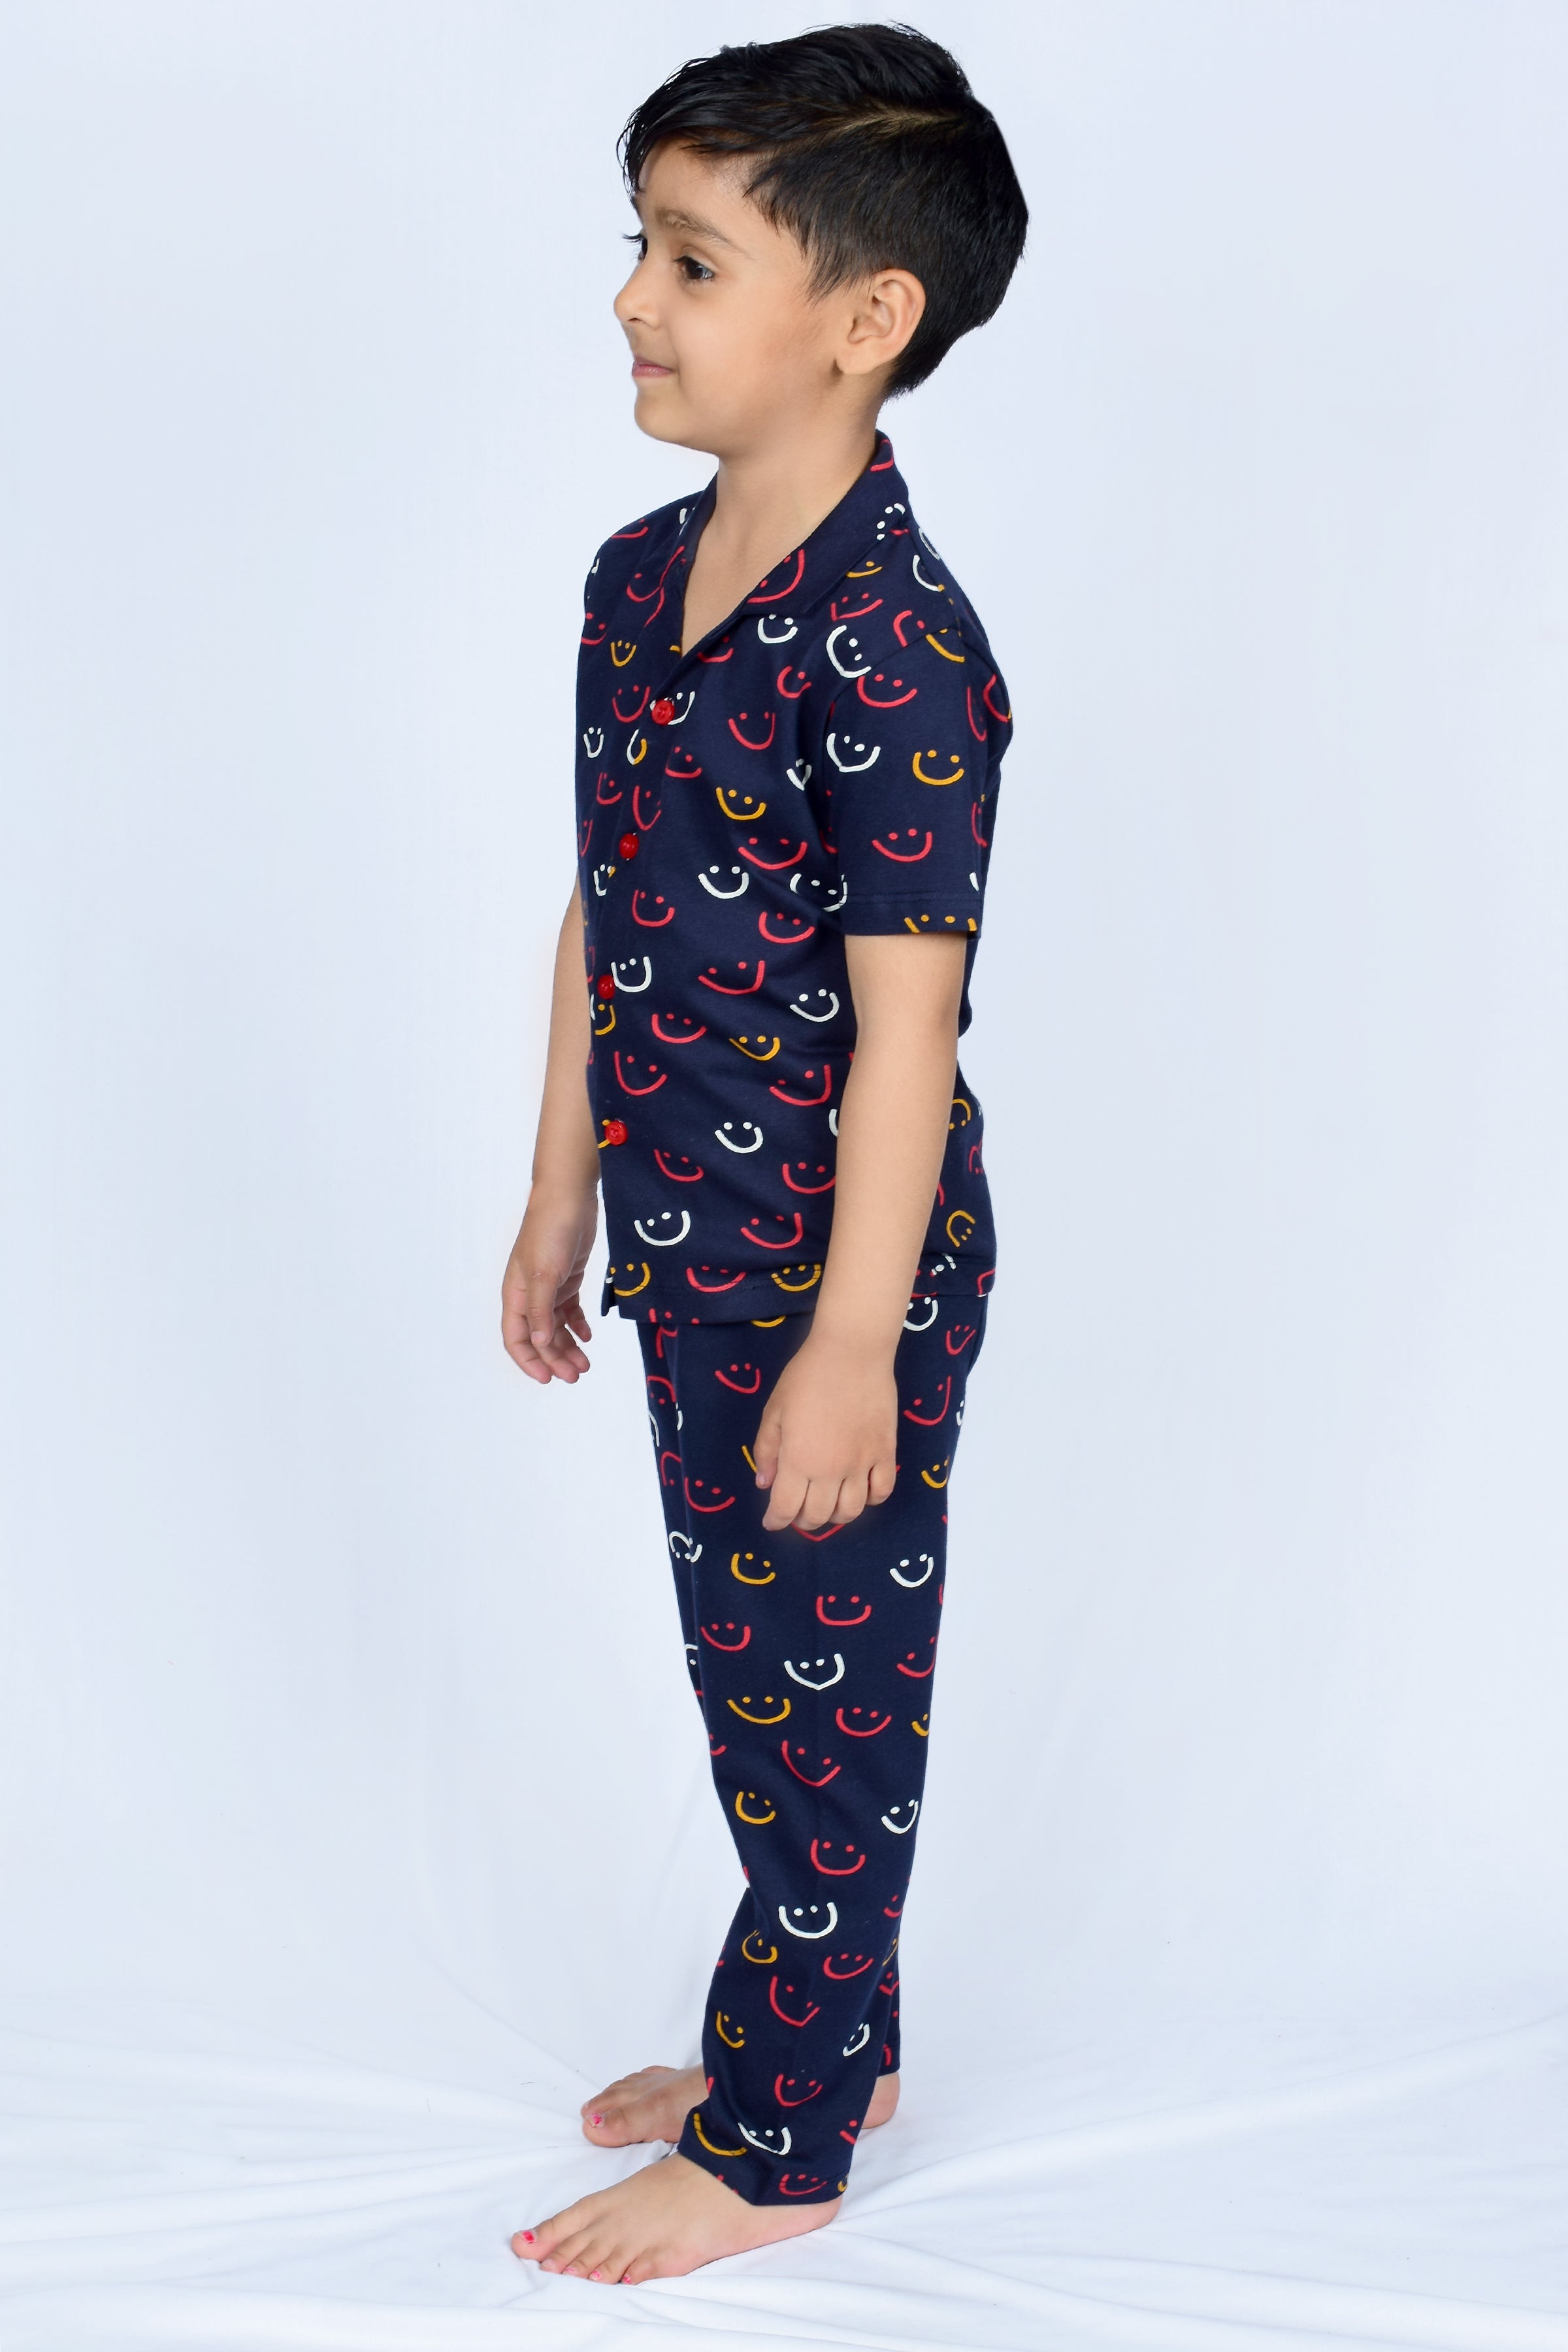 Boys Soft Cotton White Nightwear  Well Researched Affordable Products for  Kids  Mom  MyBlueShelf